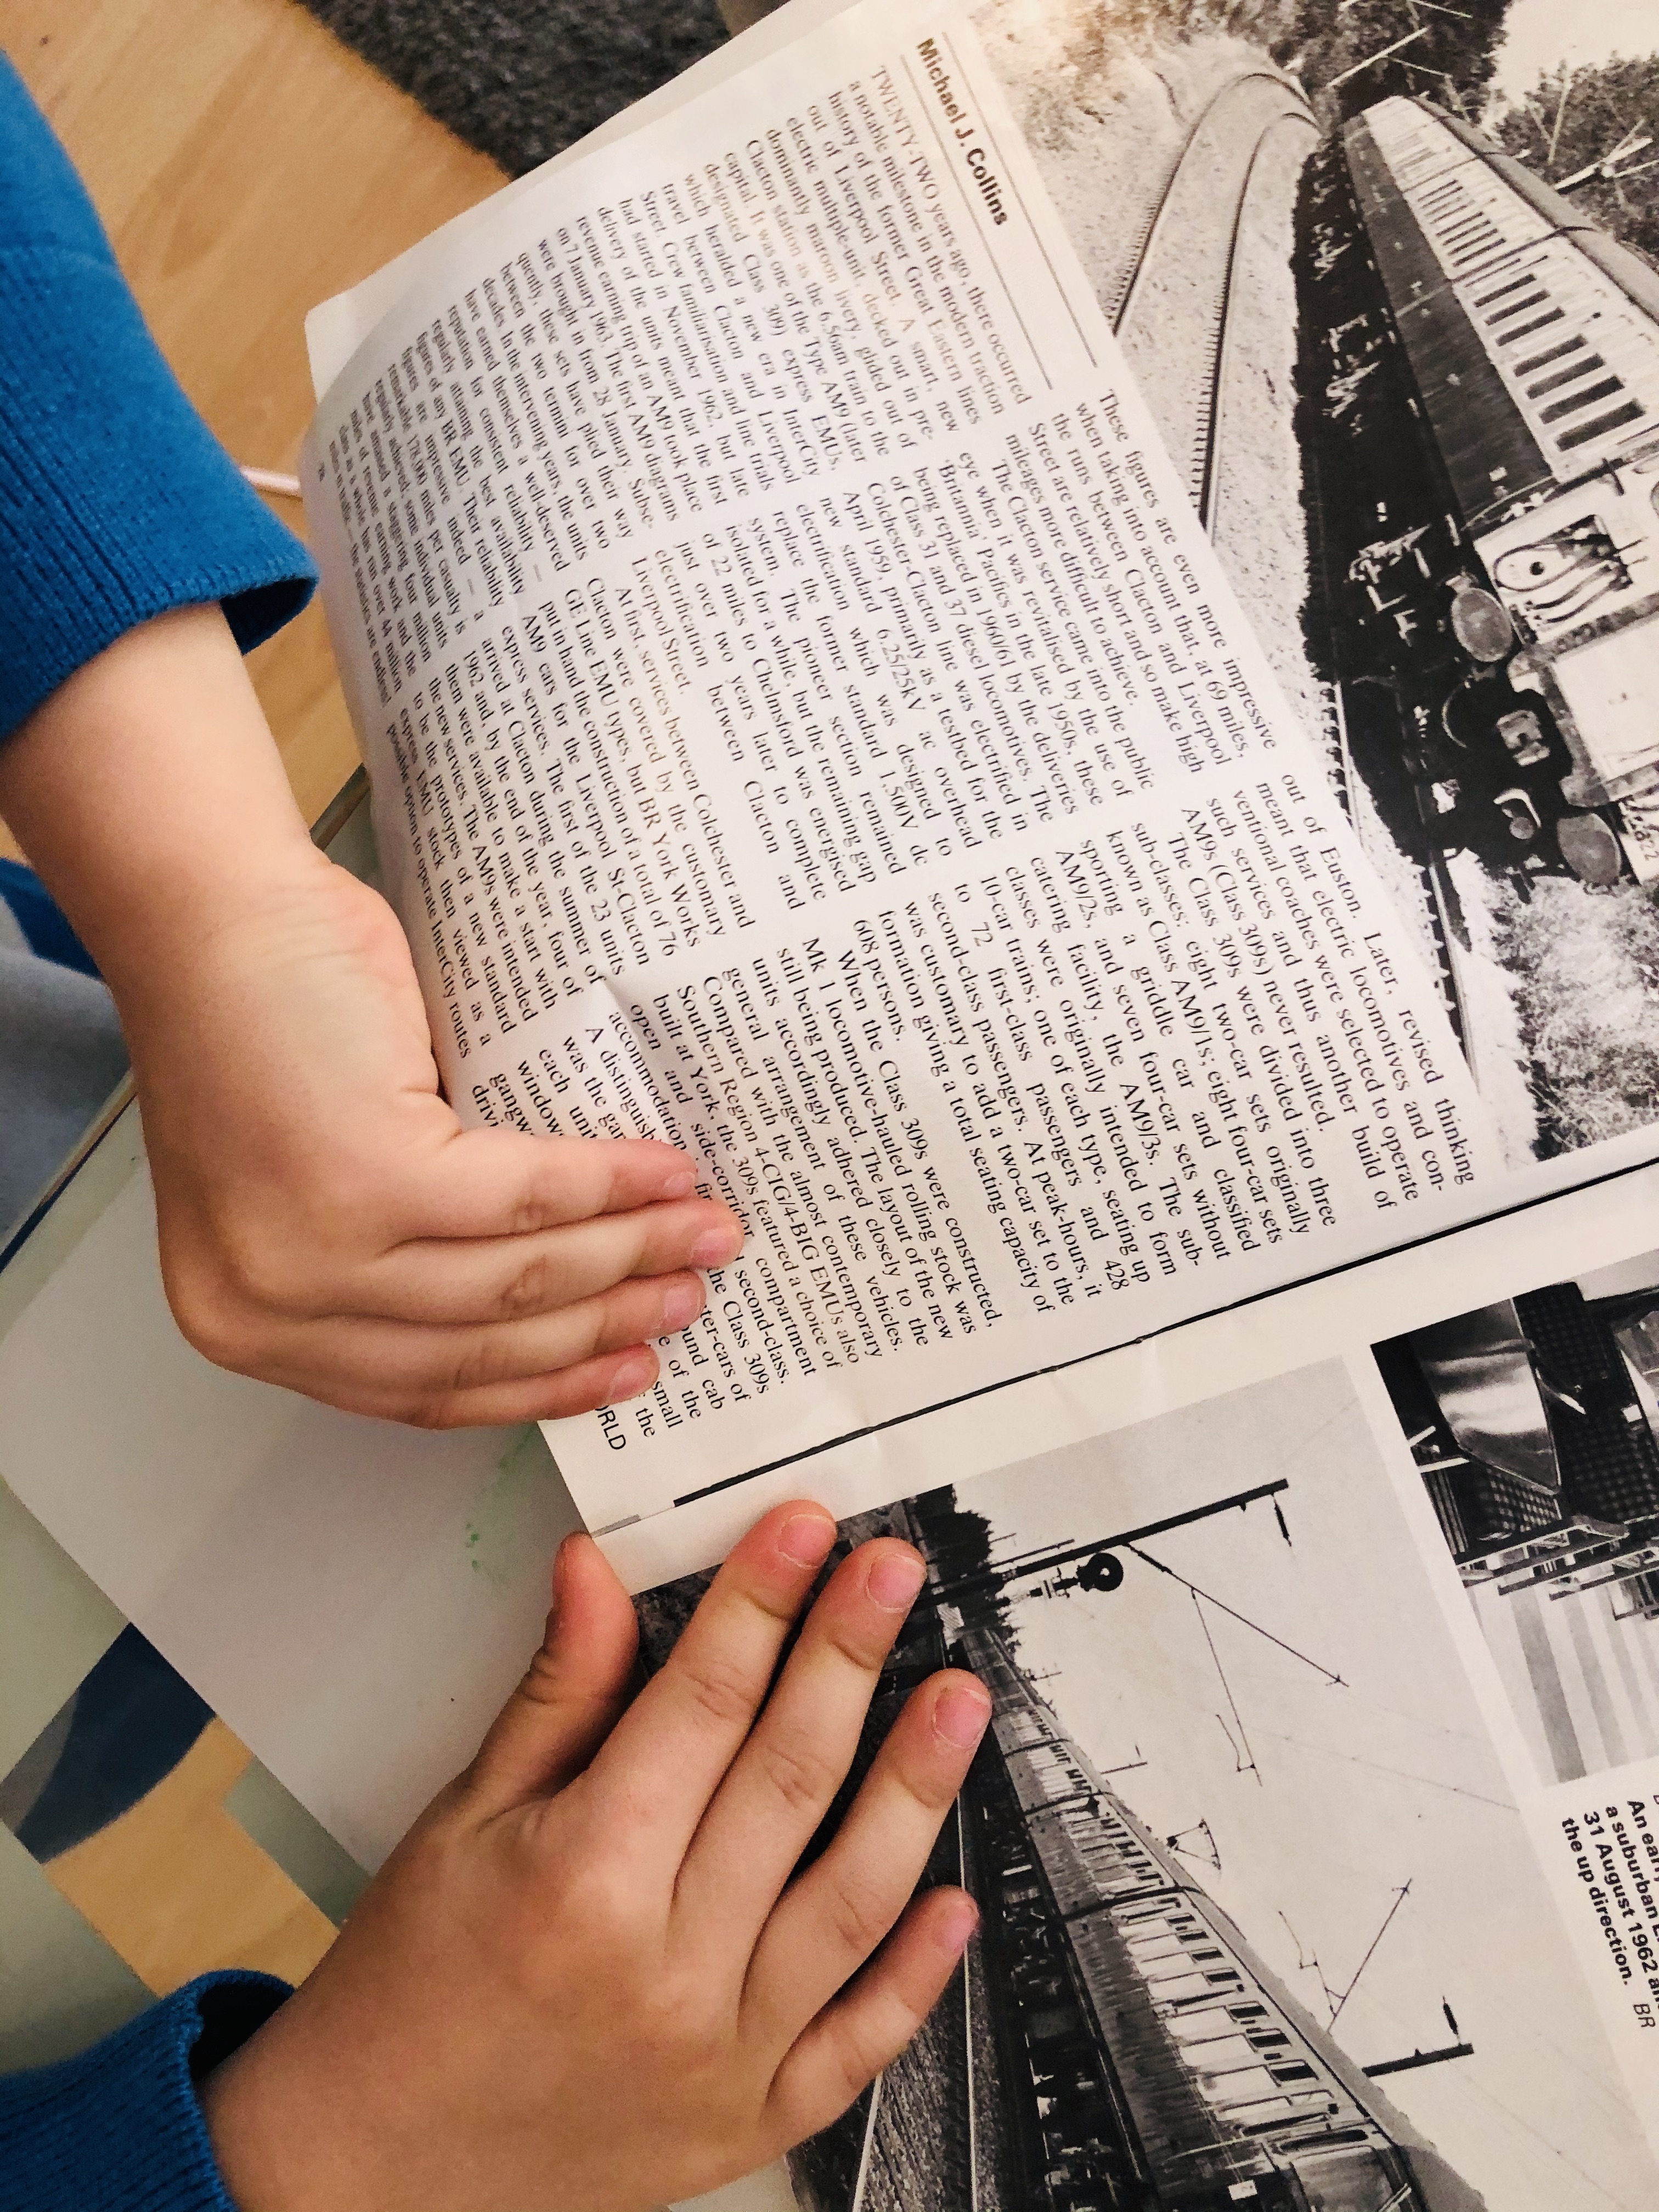 kid tearing out old magazine papers